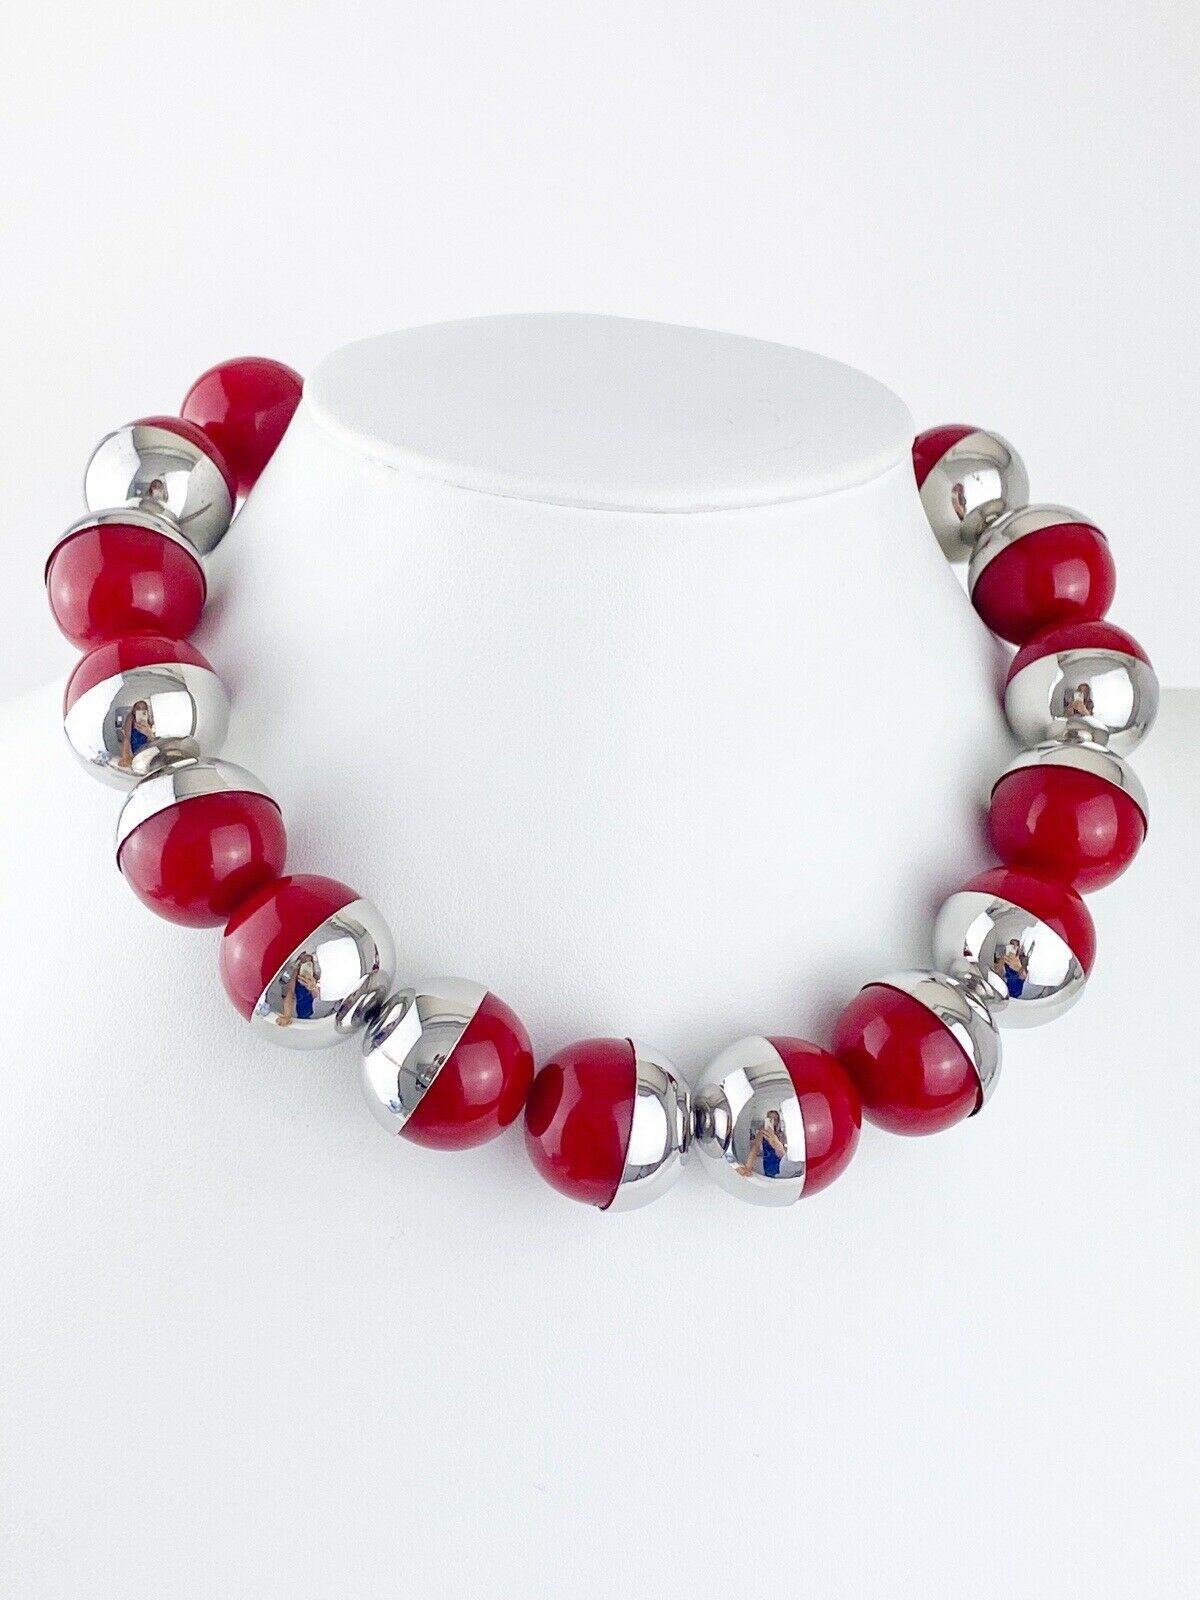 YSL Yves Saint Laurent Vintage Silver Tone Red Massive Bead Choker Necklace